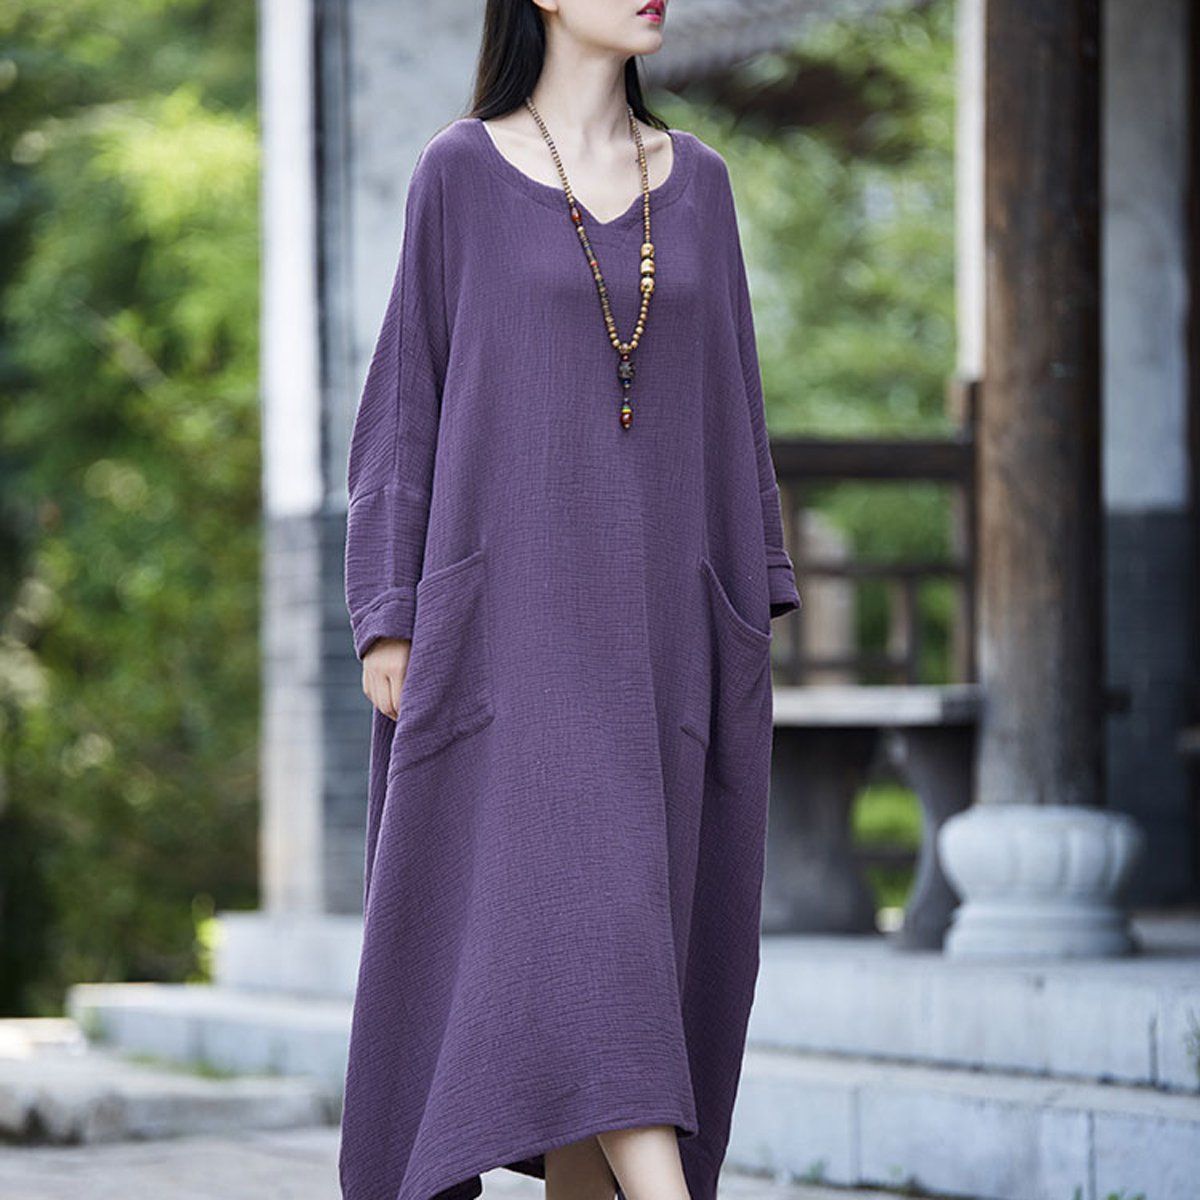 Women Solid Casual Big Pockets Loose Maxi Long Sleeve Dress 2019 May New One Size Purple 